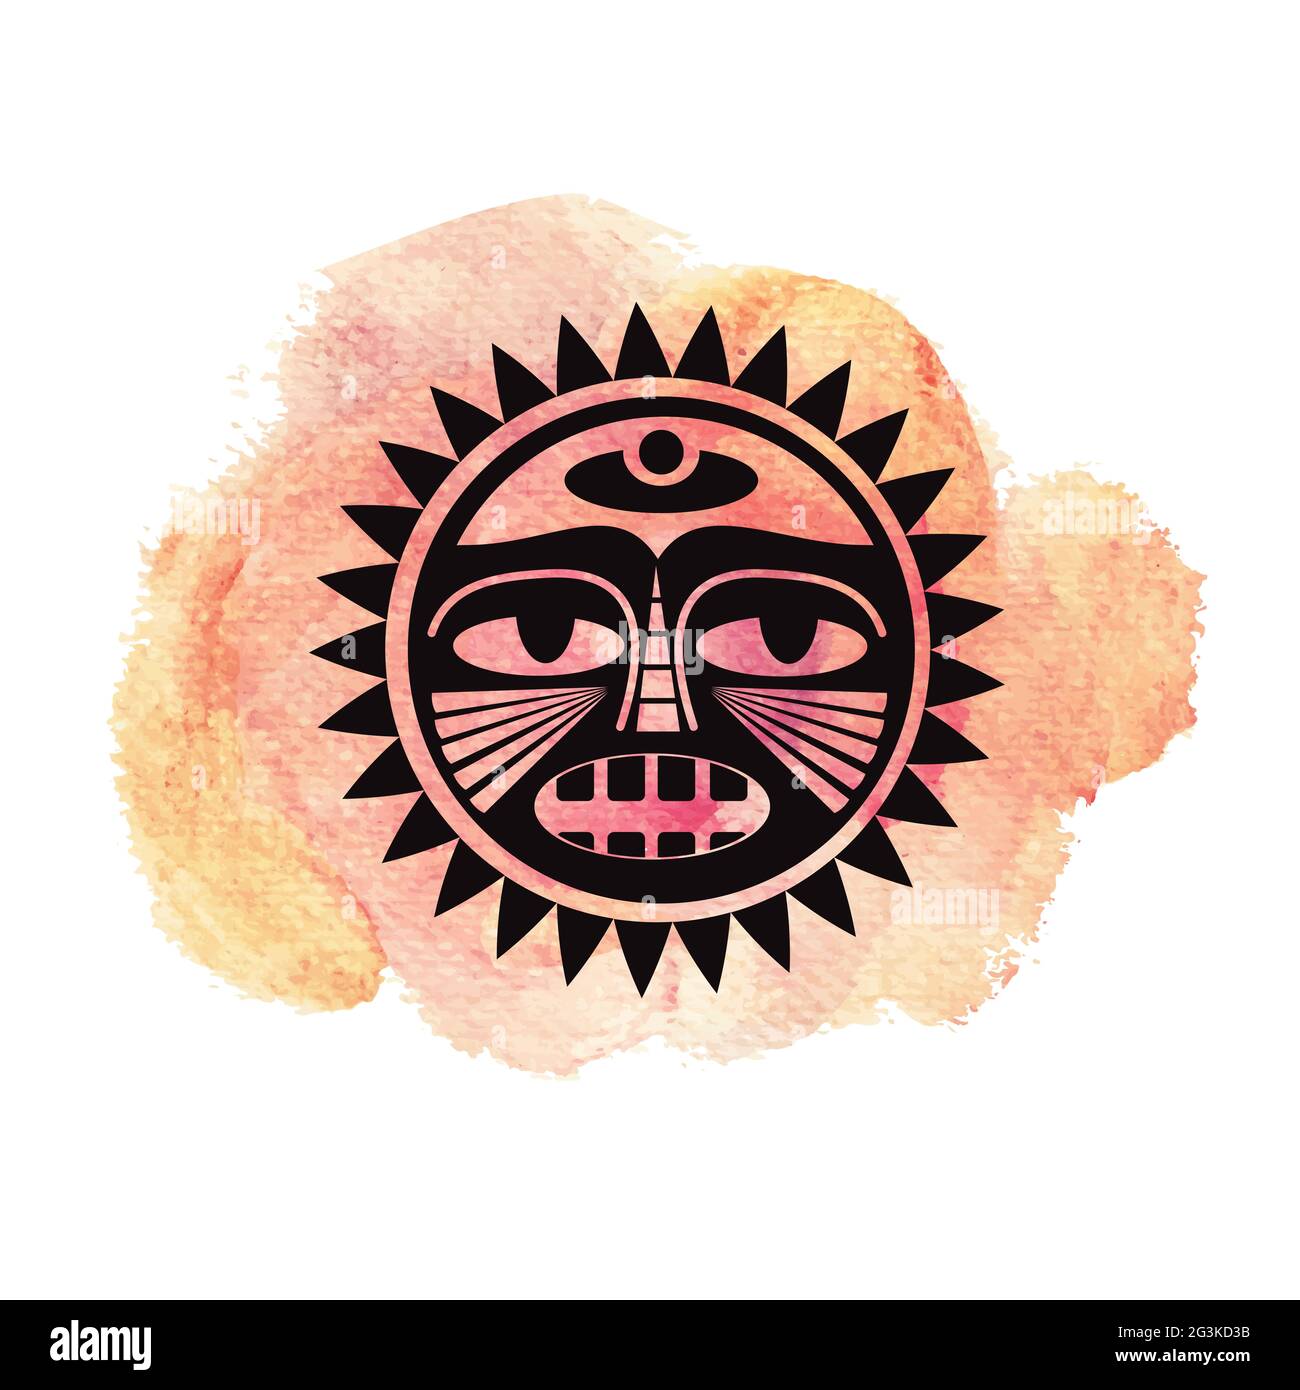 Illustration of polynesian style tattoo on watercolor background Stock Photo